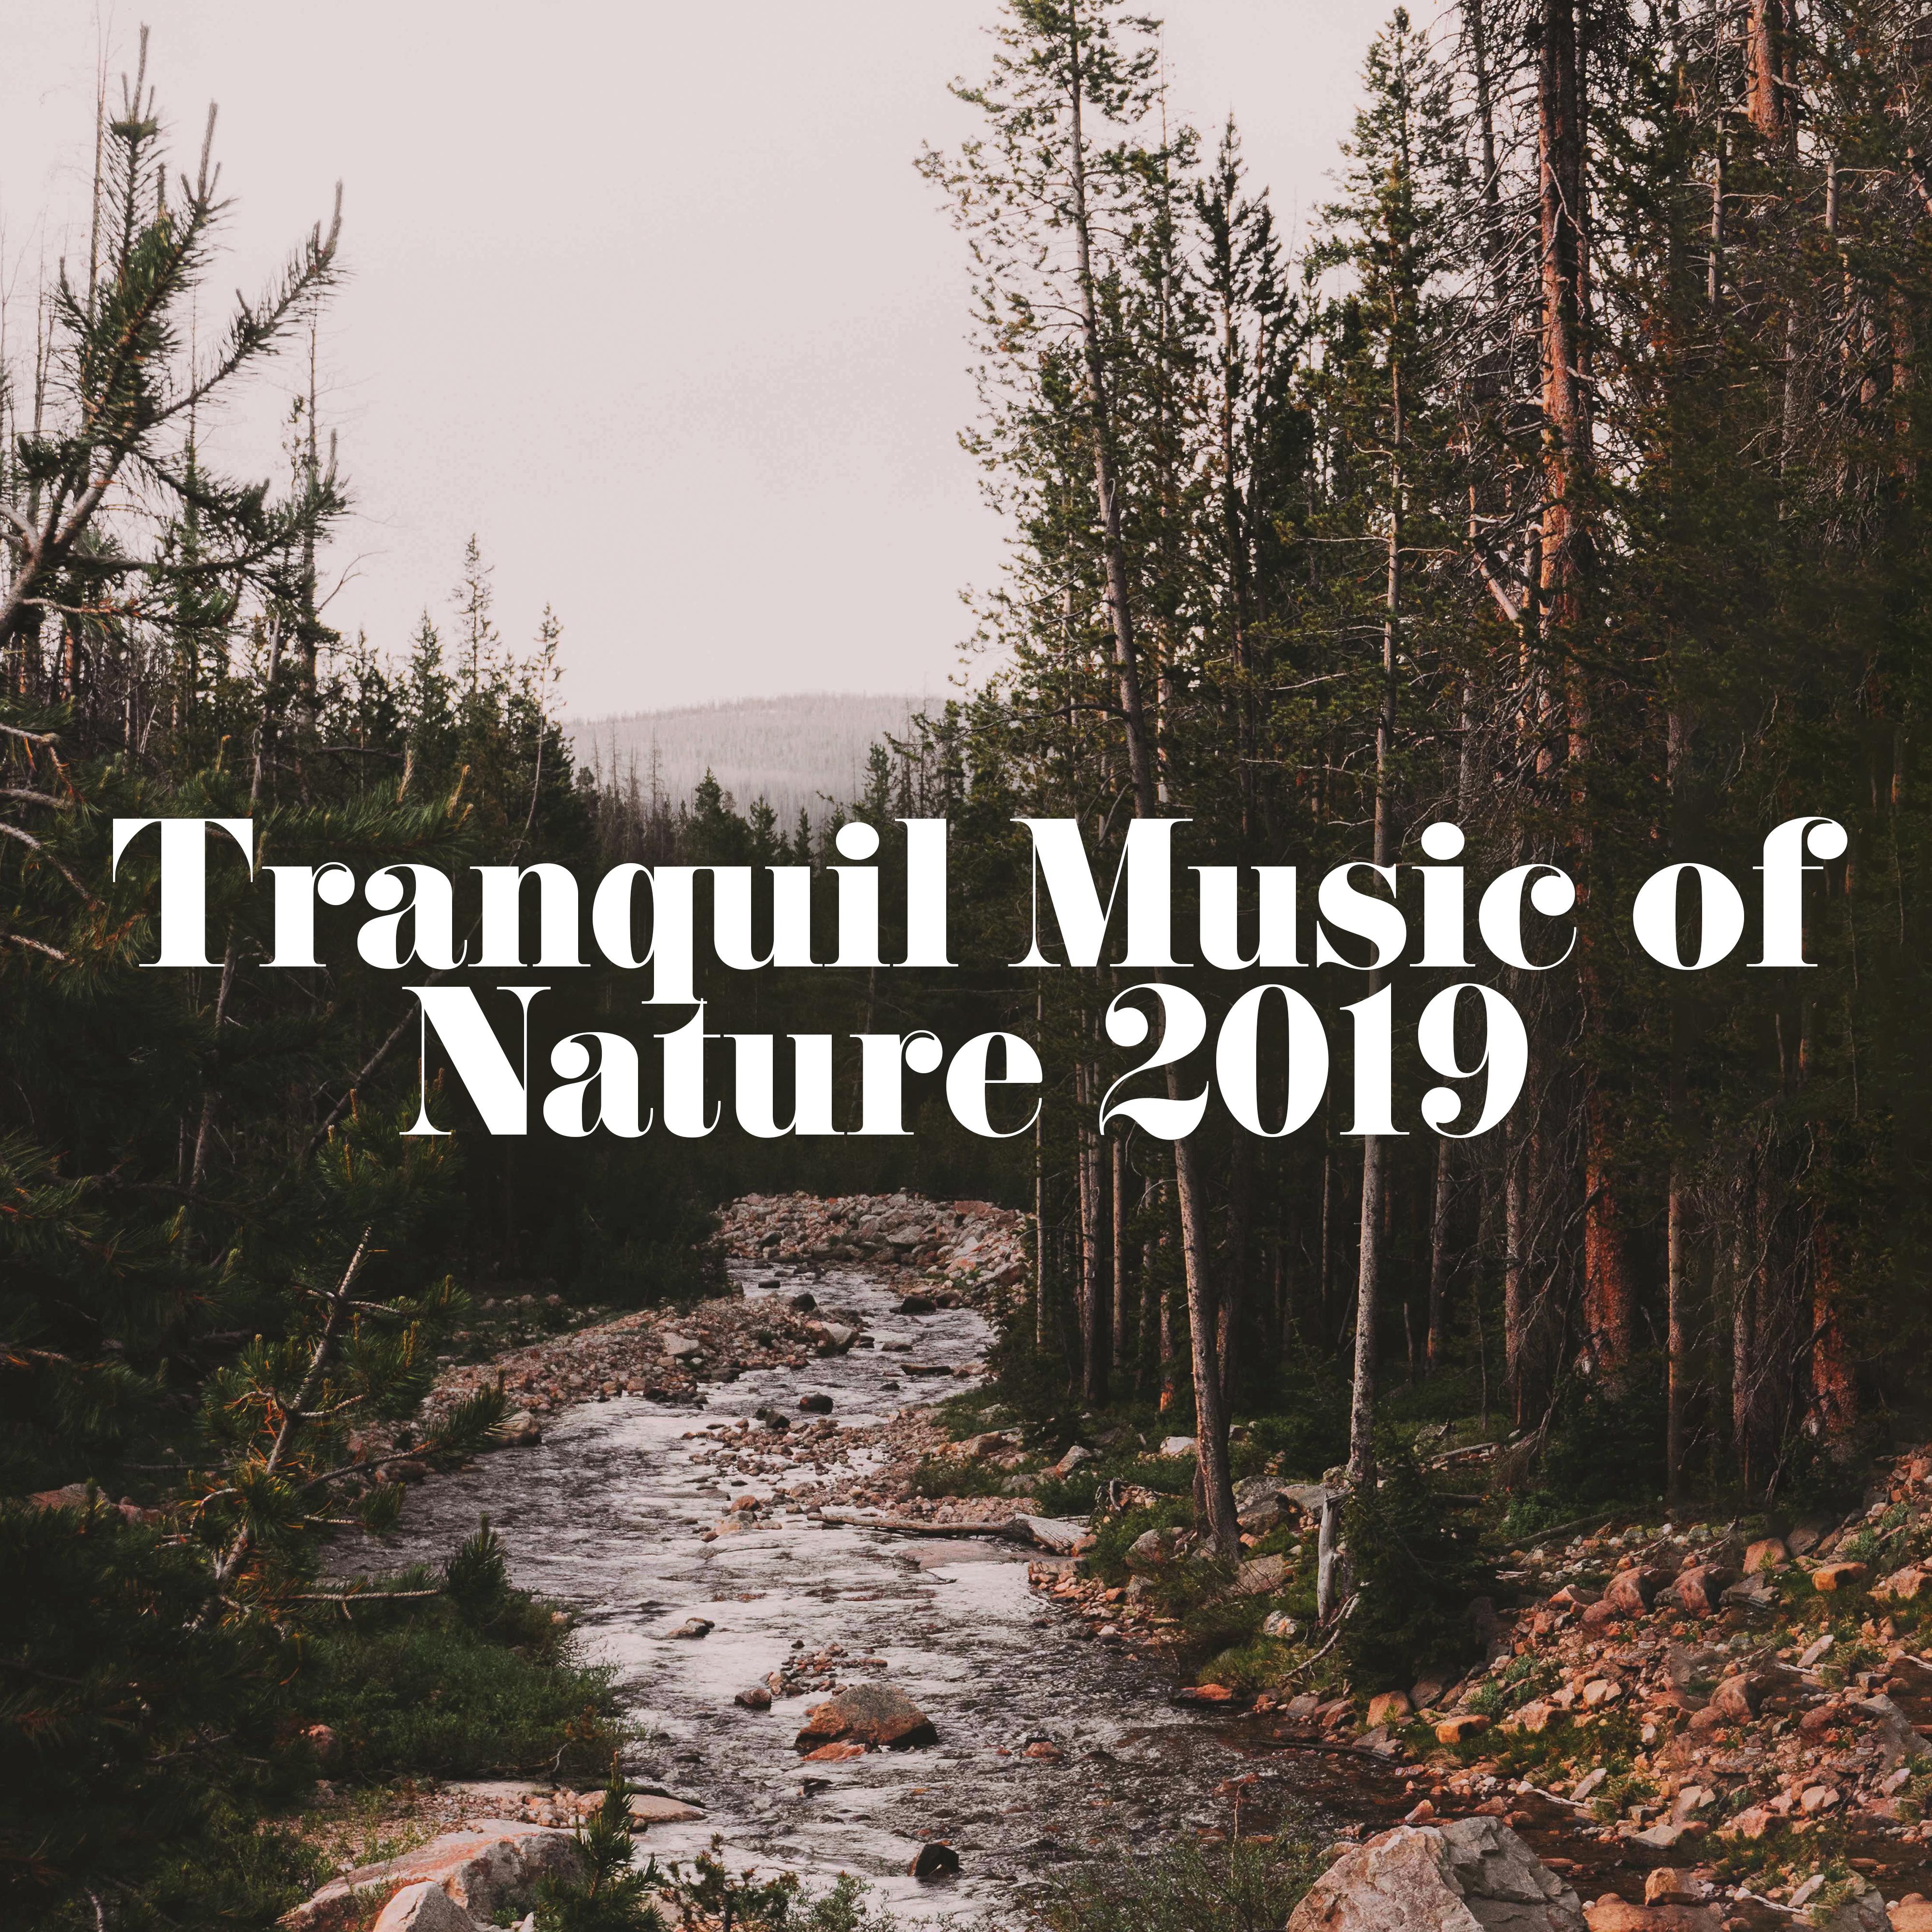 Tranquil Music of Nature 2019